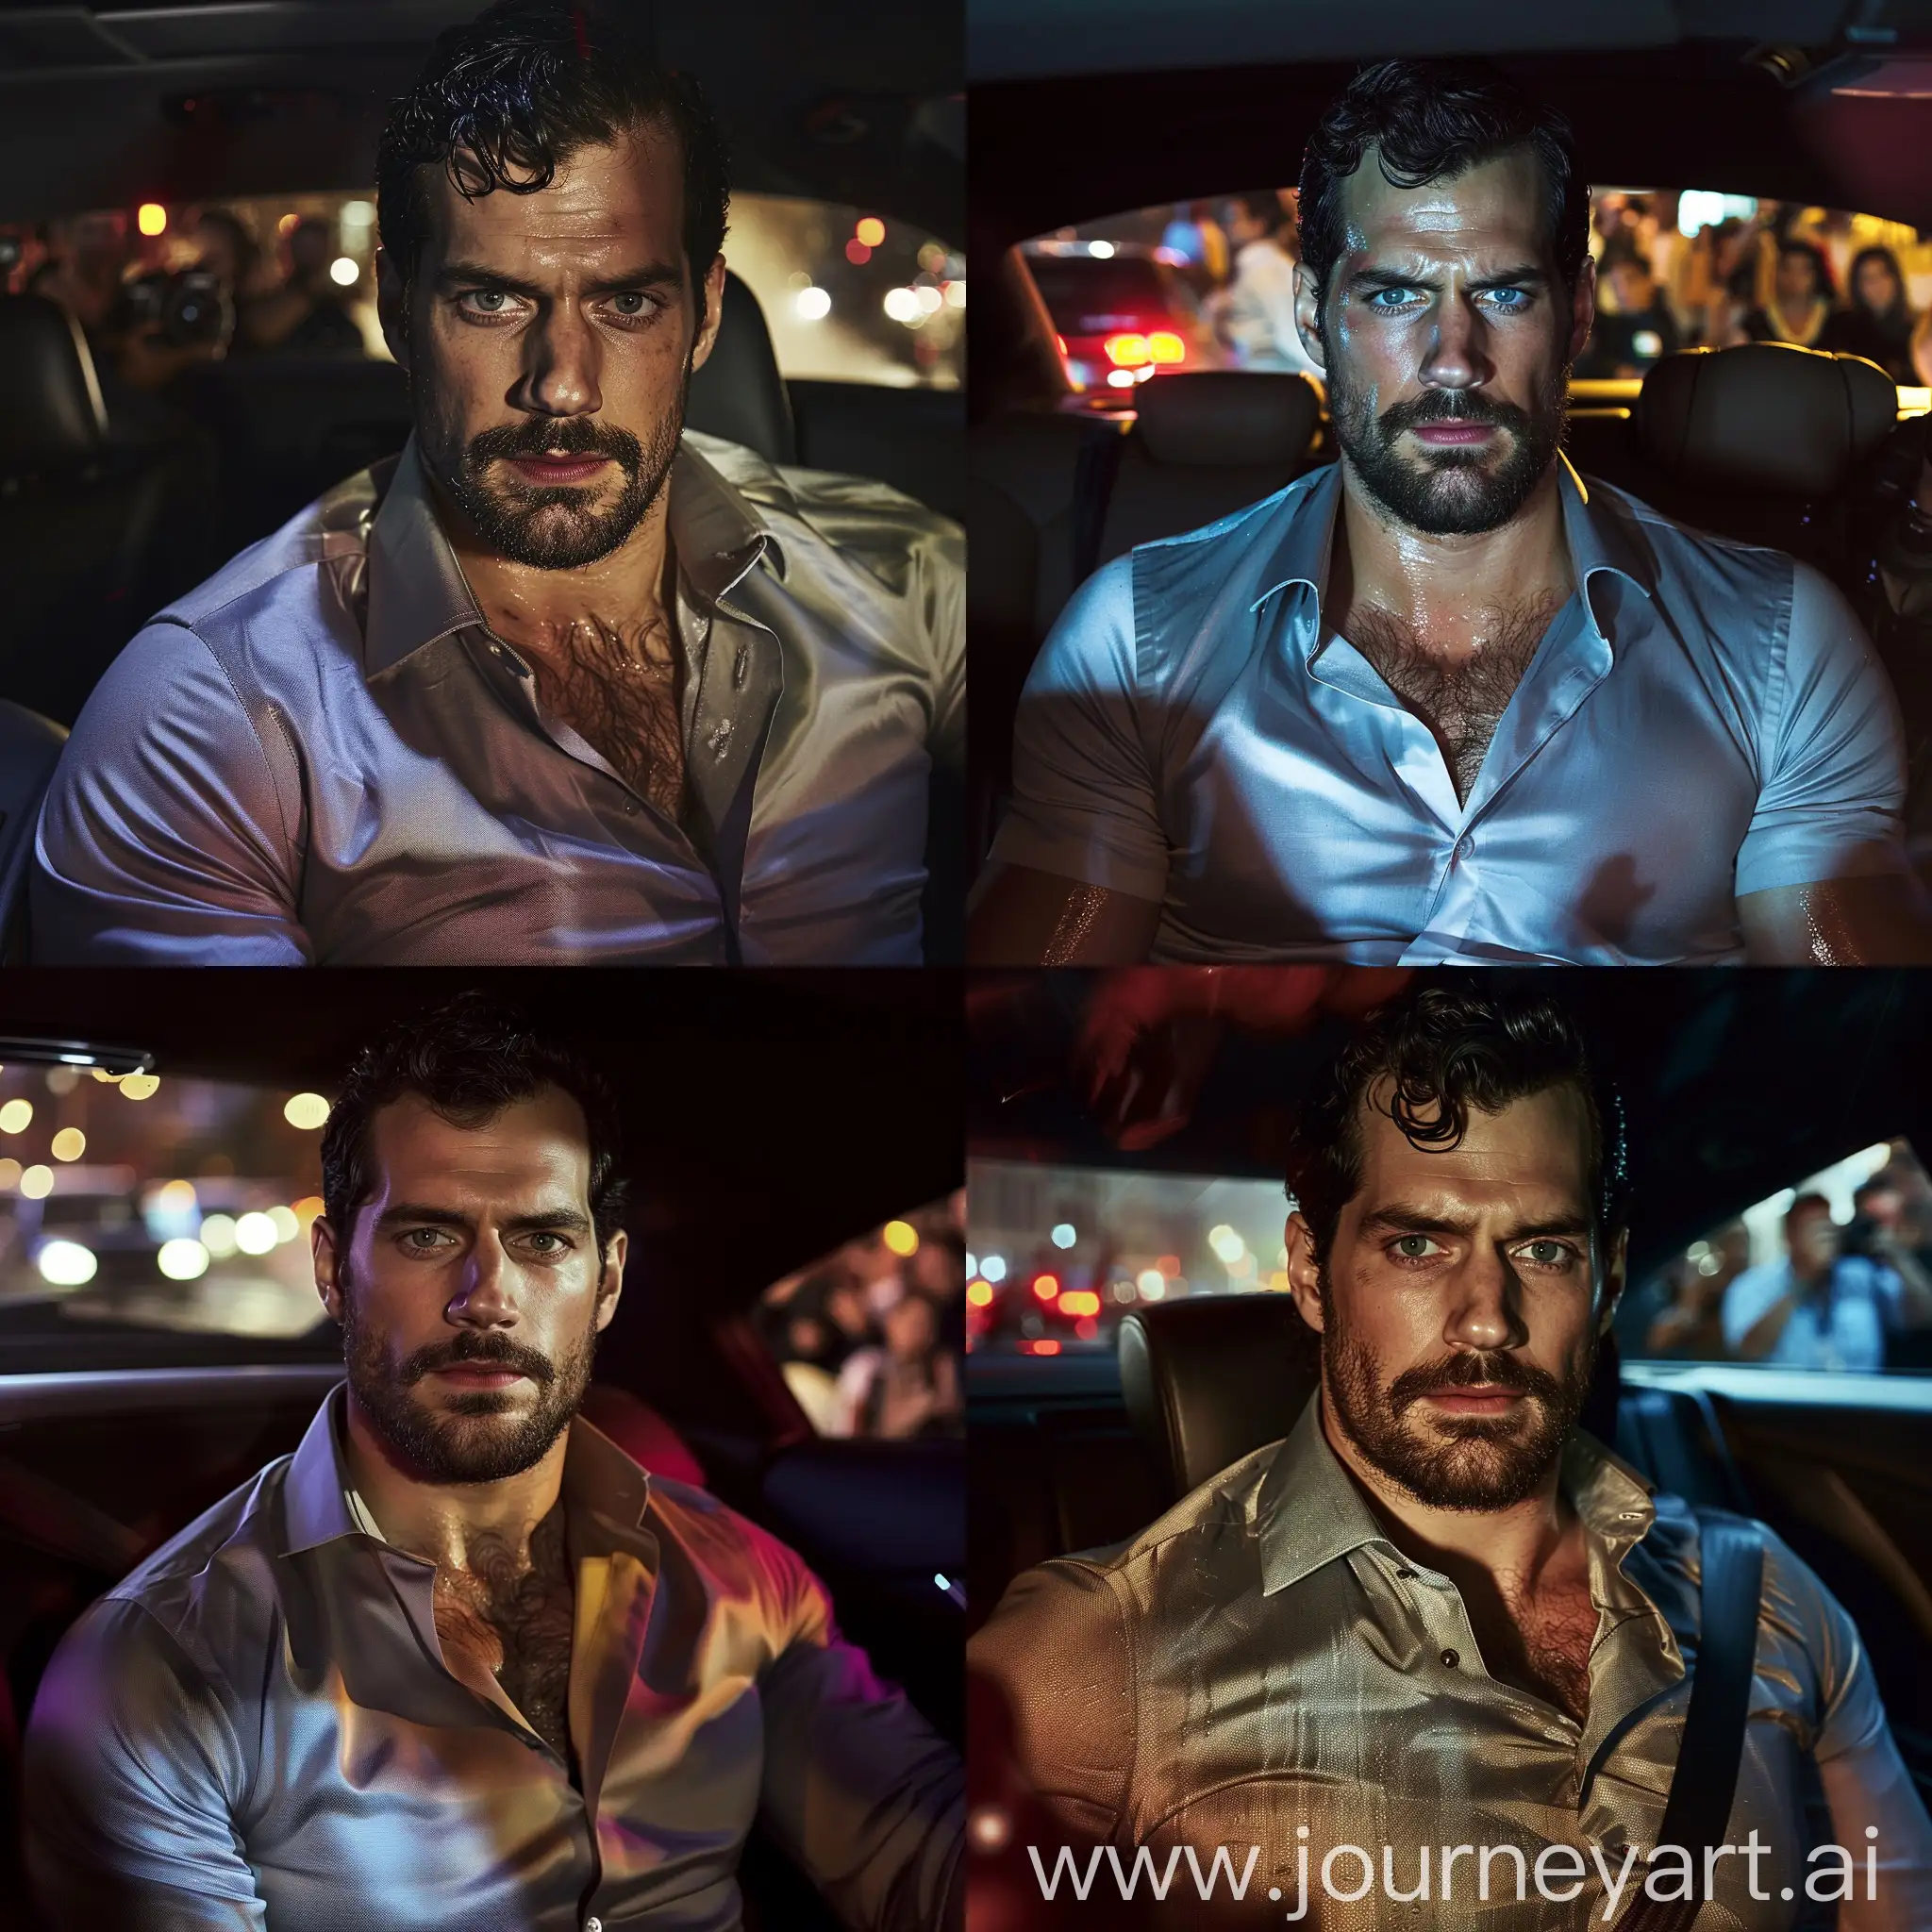 Movie lighting, actor Henry Cavill handsome face, a good looking burly muscular man in the backseat of the car, wearing a dress shirt, fit male torso, hairy chest, bearded handsome Henry Cavill inside a car, dim lighting, sweaty and glistening skin, blurred background paparazzi outside the car